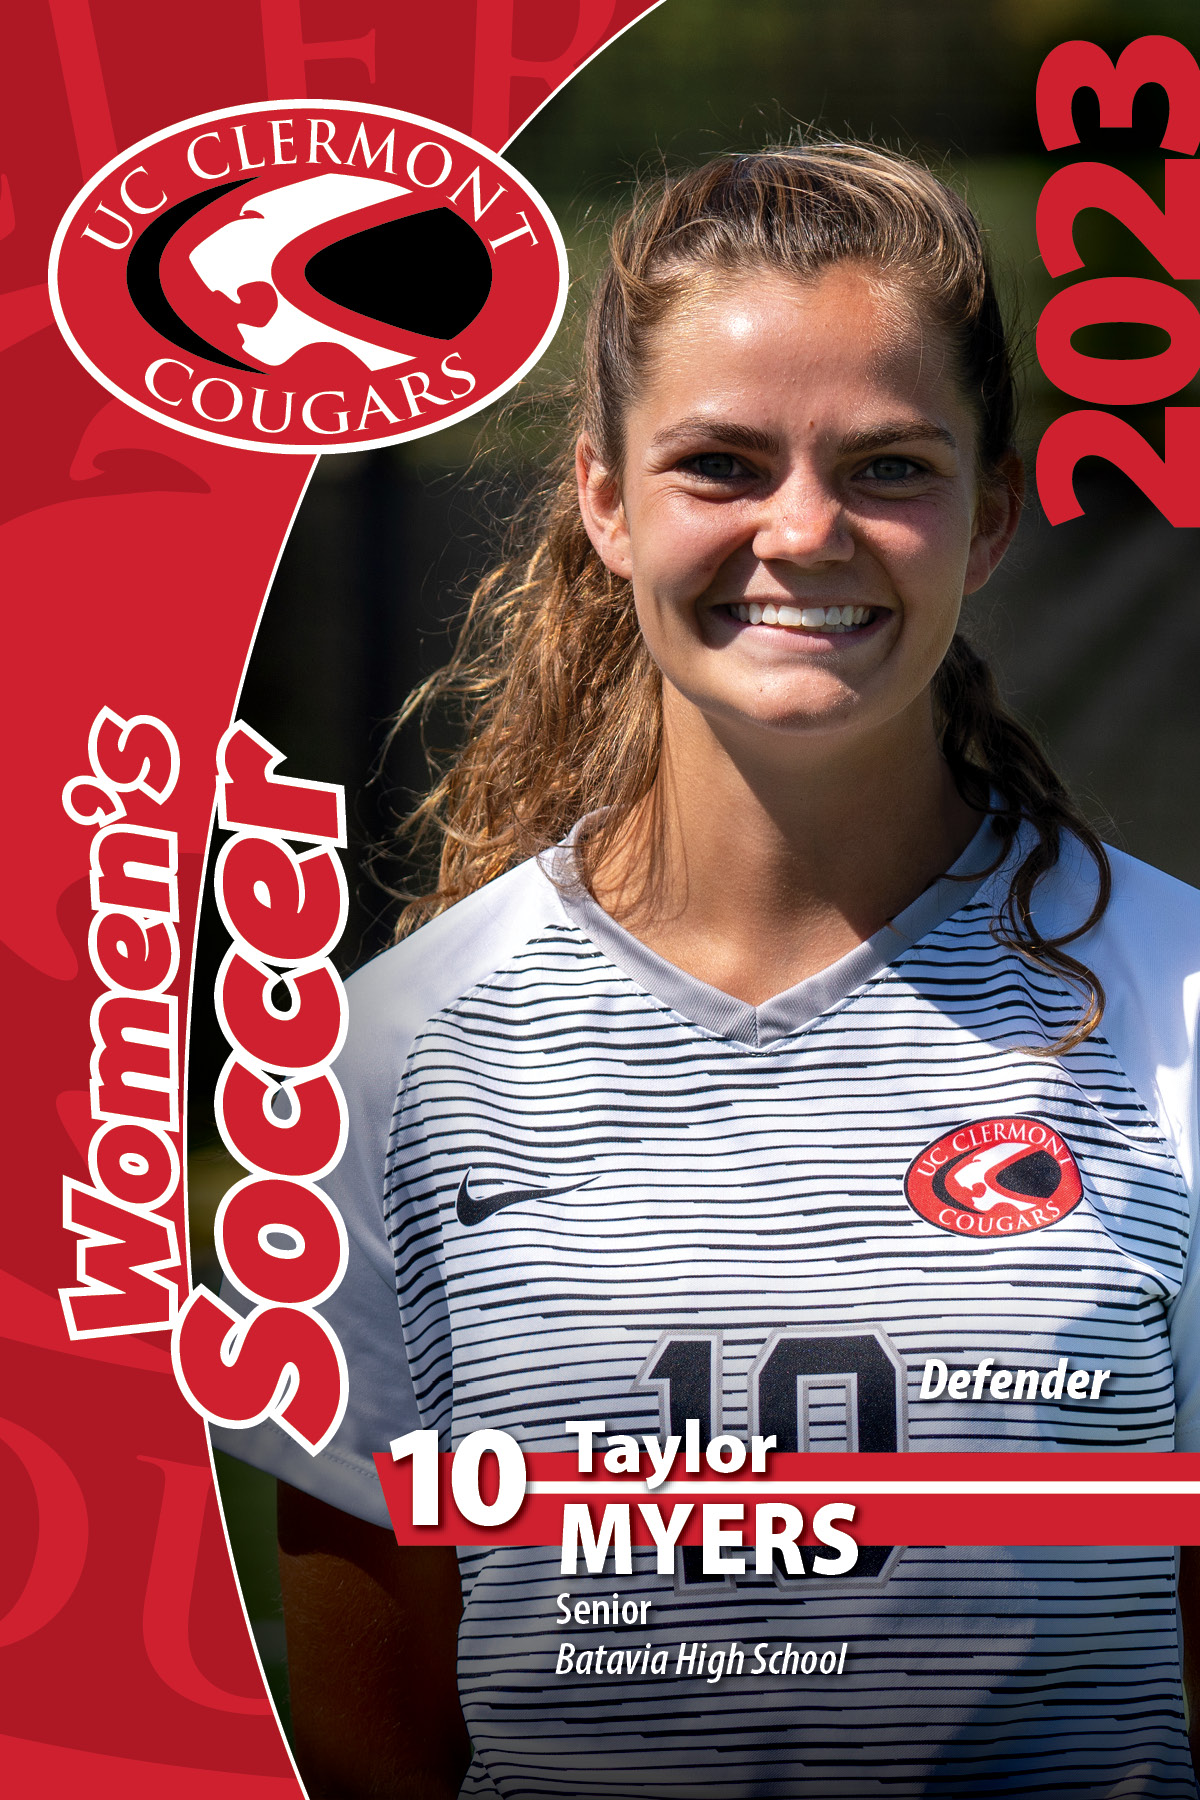 10 - Taylor Myers